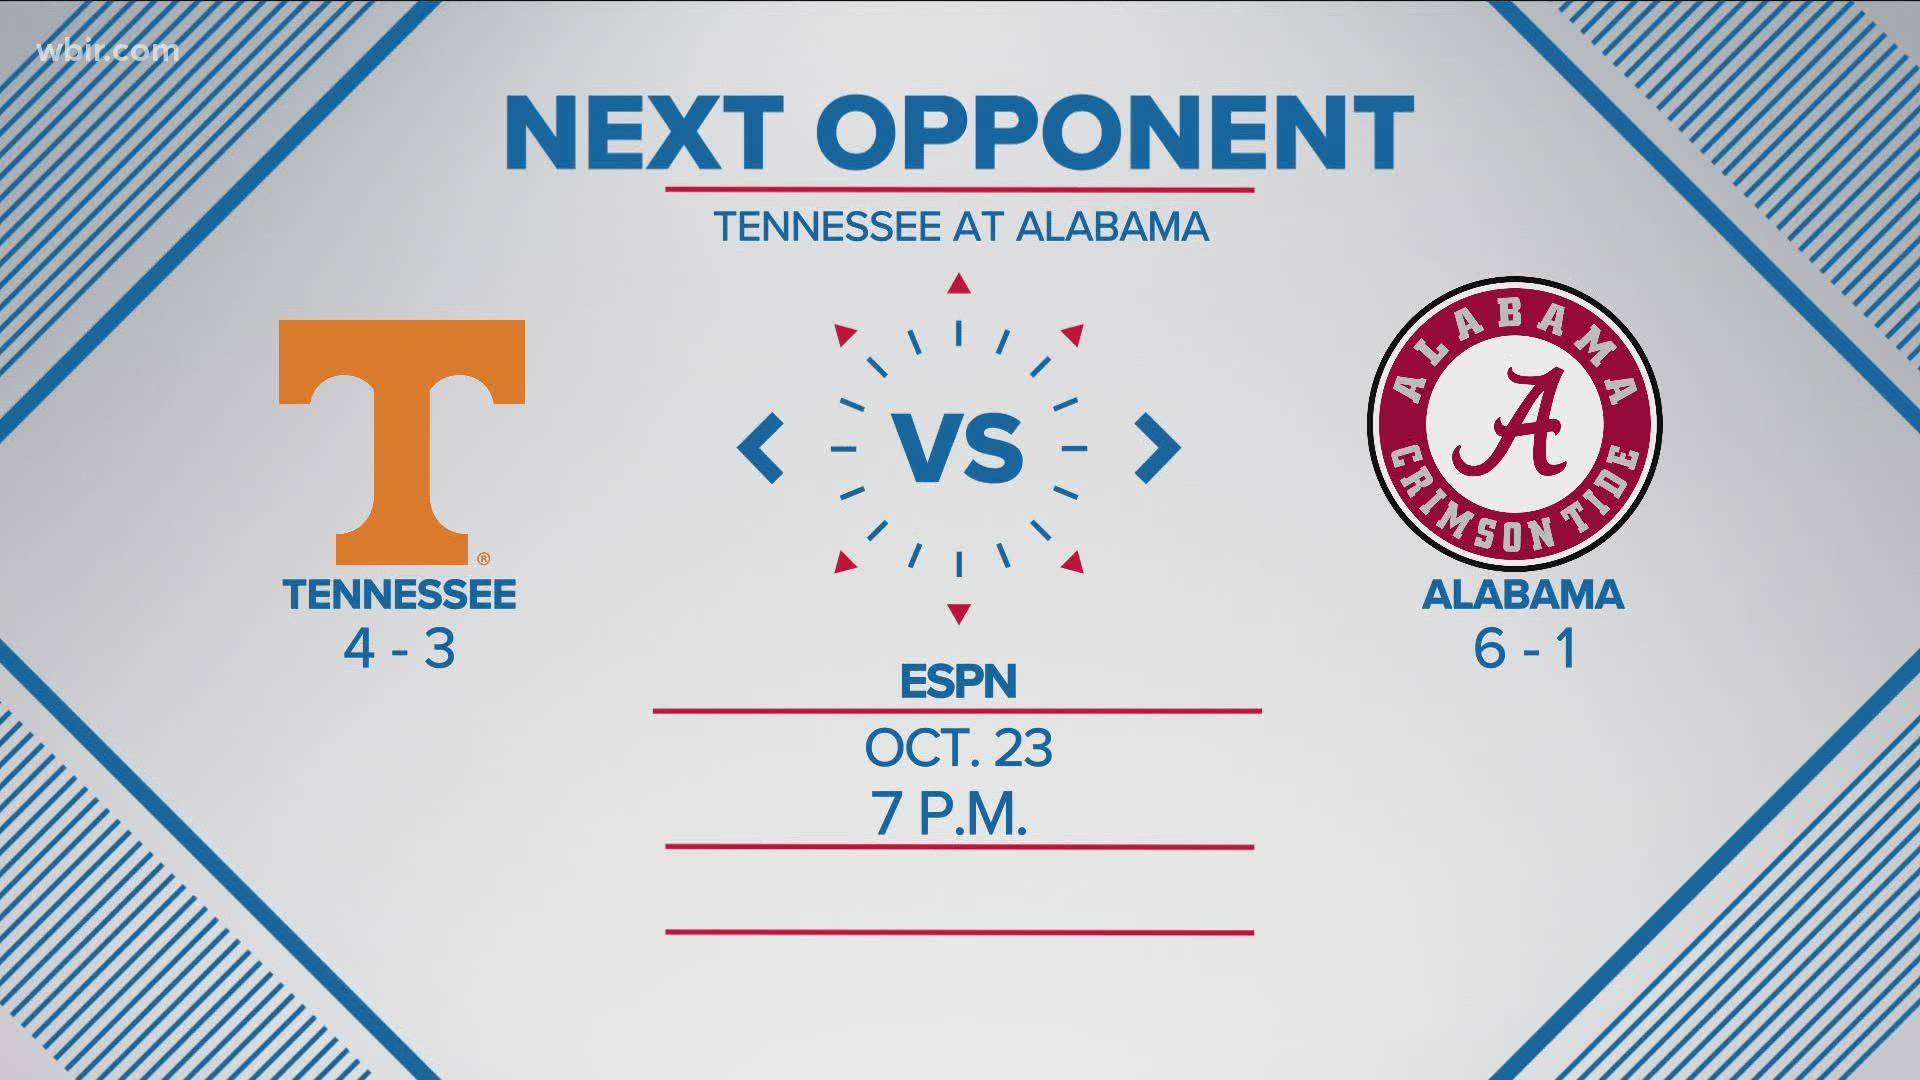 Even though it's the fourth Saturday in October, the Vols will travel to Tuscaloosa to face No. 4 Alabama this Saturday.